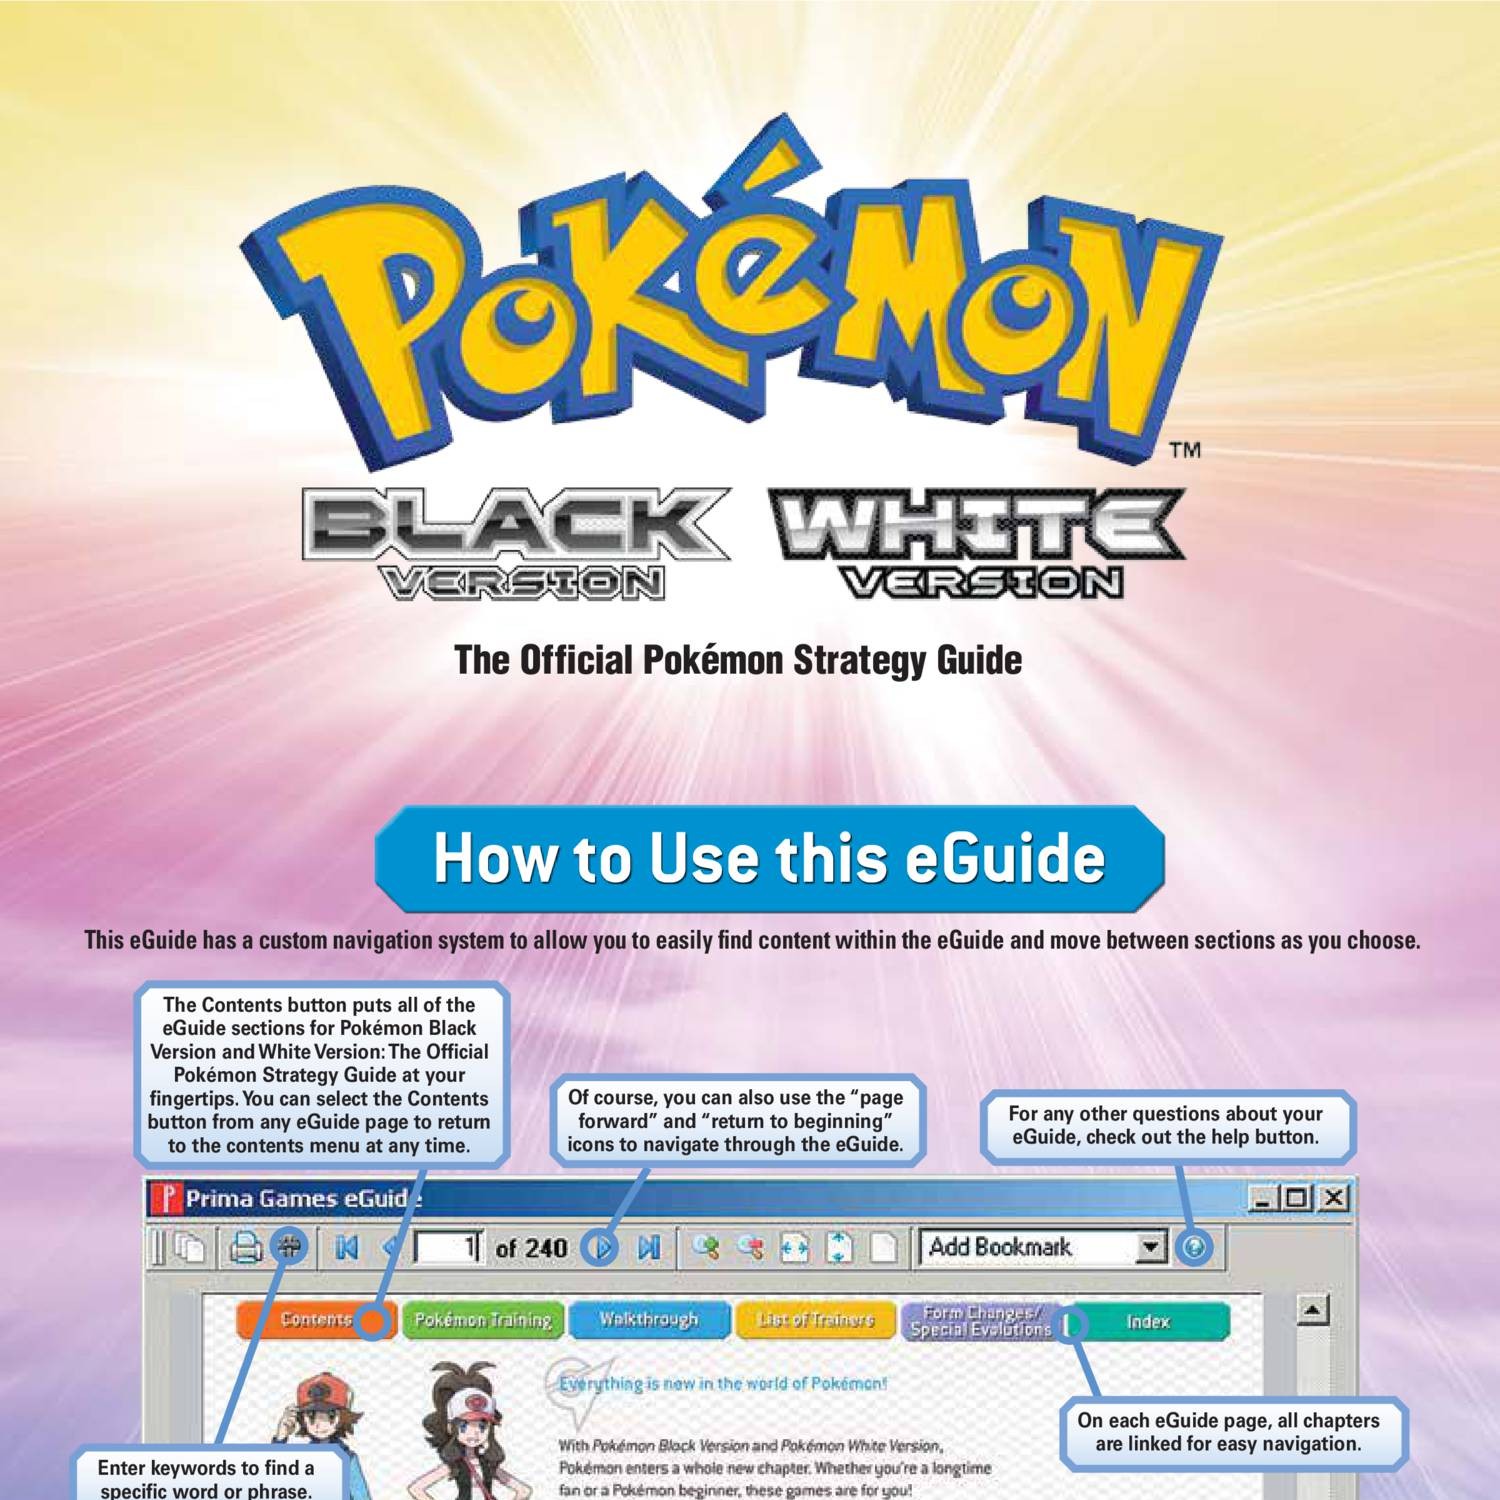 Pokemon Black and White - Strategy Guide